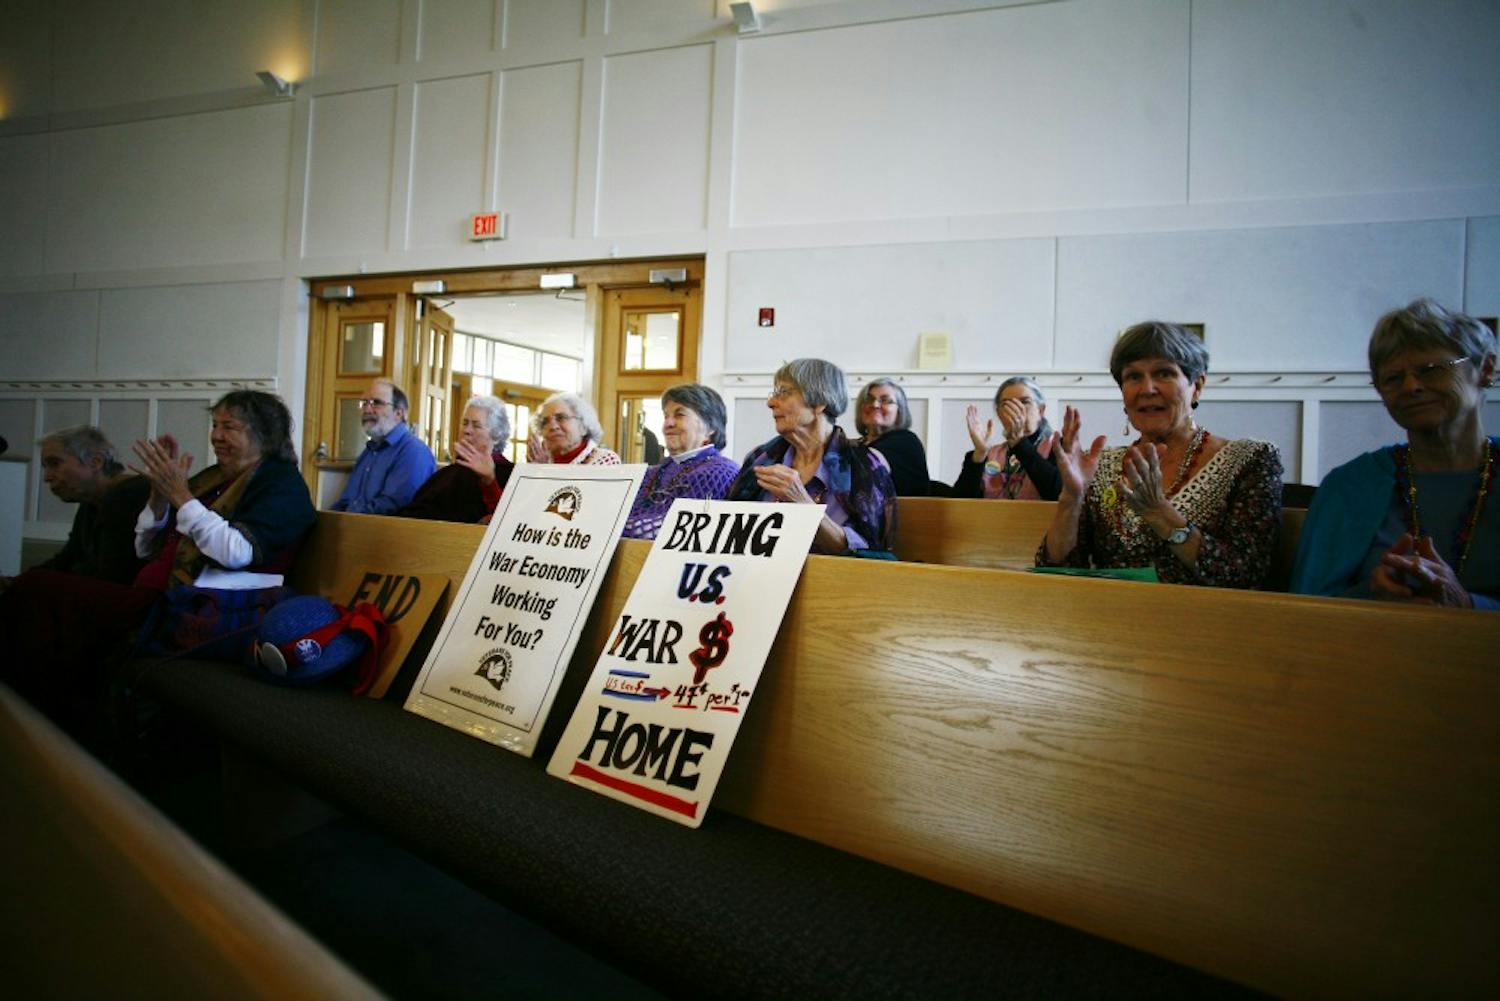 The Raging Grannies of Chapel Hill held a peace talk event called "Bring Our War Dollars Home" at the United Church of Christ of Chapel Hill on Saturday morning. More than a dozen community leaders spoke to the crowd, including Chapel Hill Mayor Mark Kleinschmidt, Representative David Price, N.C. Senator Ellie Kinnaird and UNC student Zaina Alsous.

The Raging Grannies clapped during and after every speaker and wore peace paraphernalia. 
